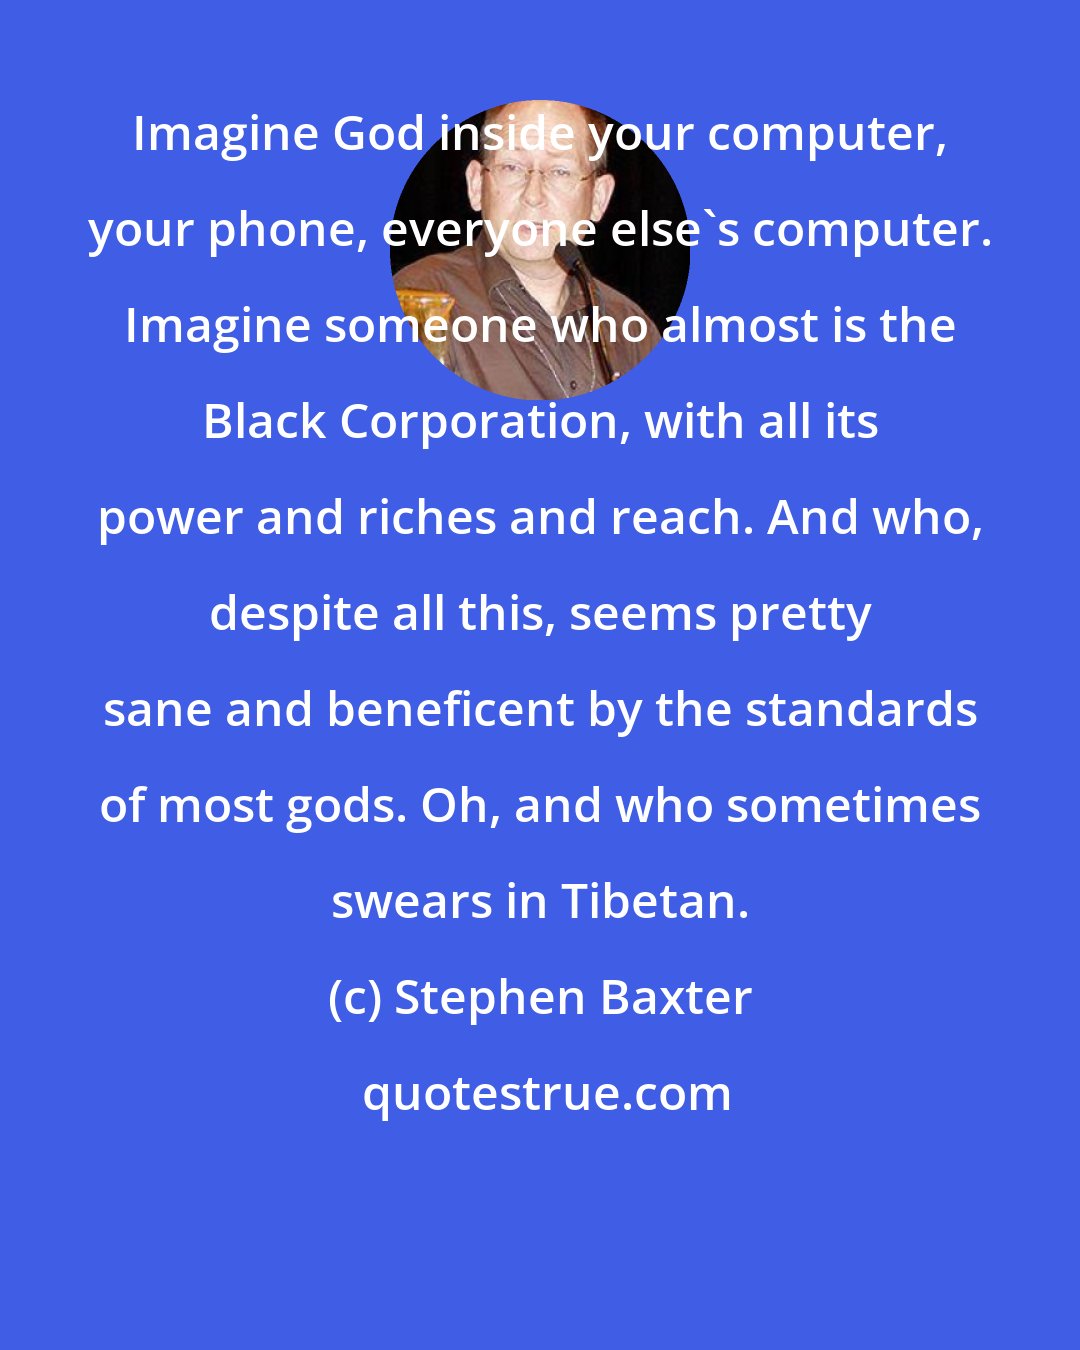 Stephen Baxter: Imagine God inside your computer, your phone, everyone else's computer. Imagine someone who almost is the Black Corporation, with all its power and riches and reach. And who, despite all this, seems pretty sane and beneficent by the standards of most gods. Oh, and who sometimes swears in Tibetan.